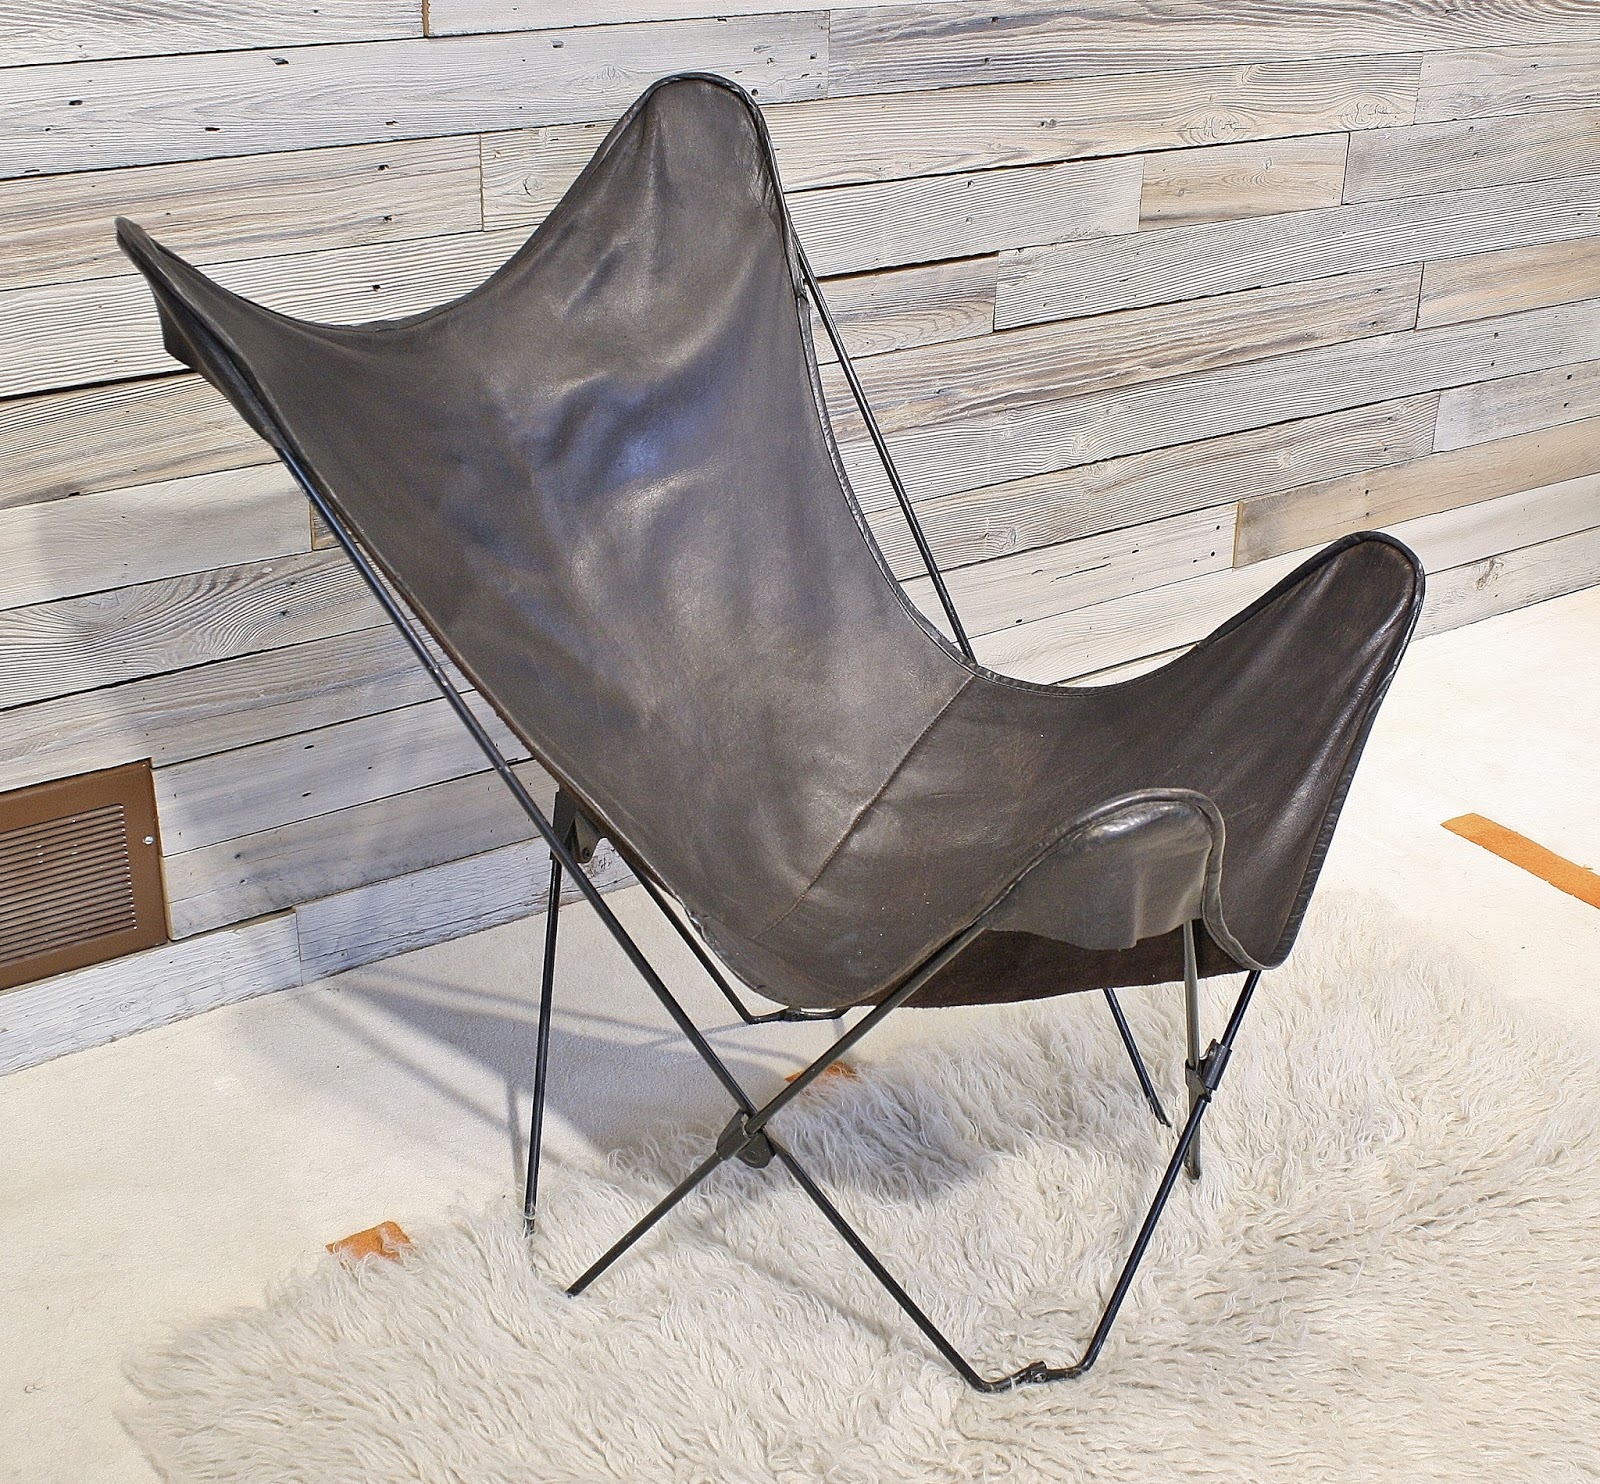 Modwerks Vintage Folding Leather Butterfly Chair